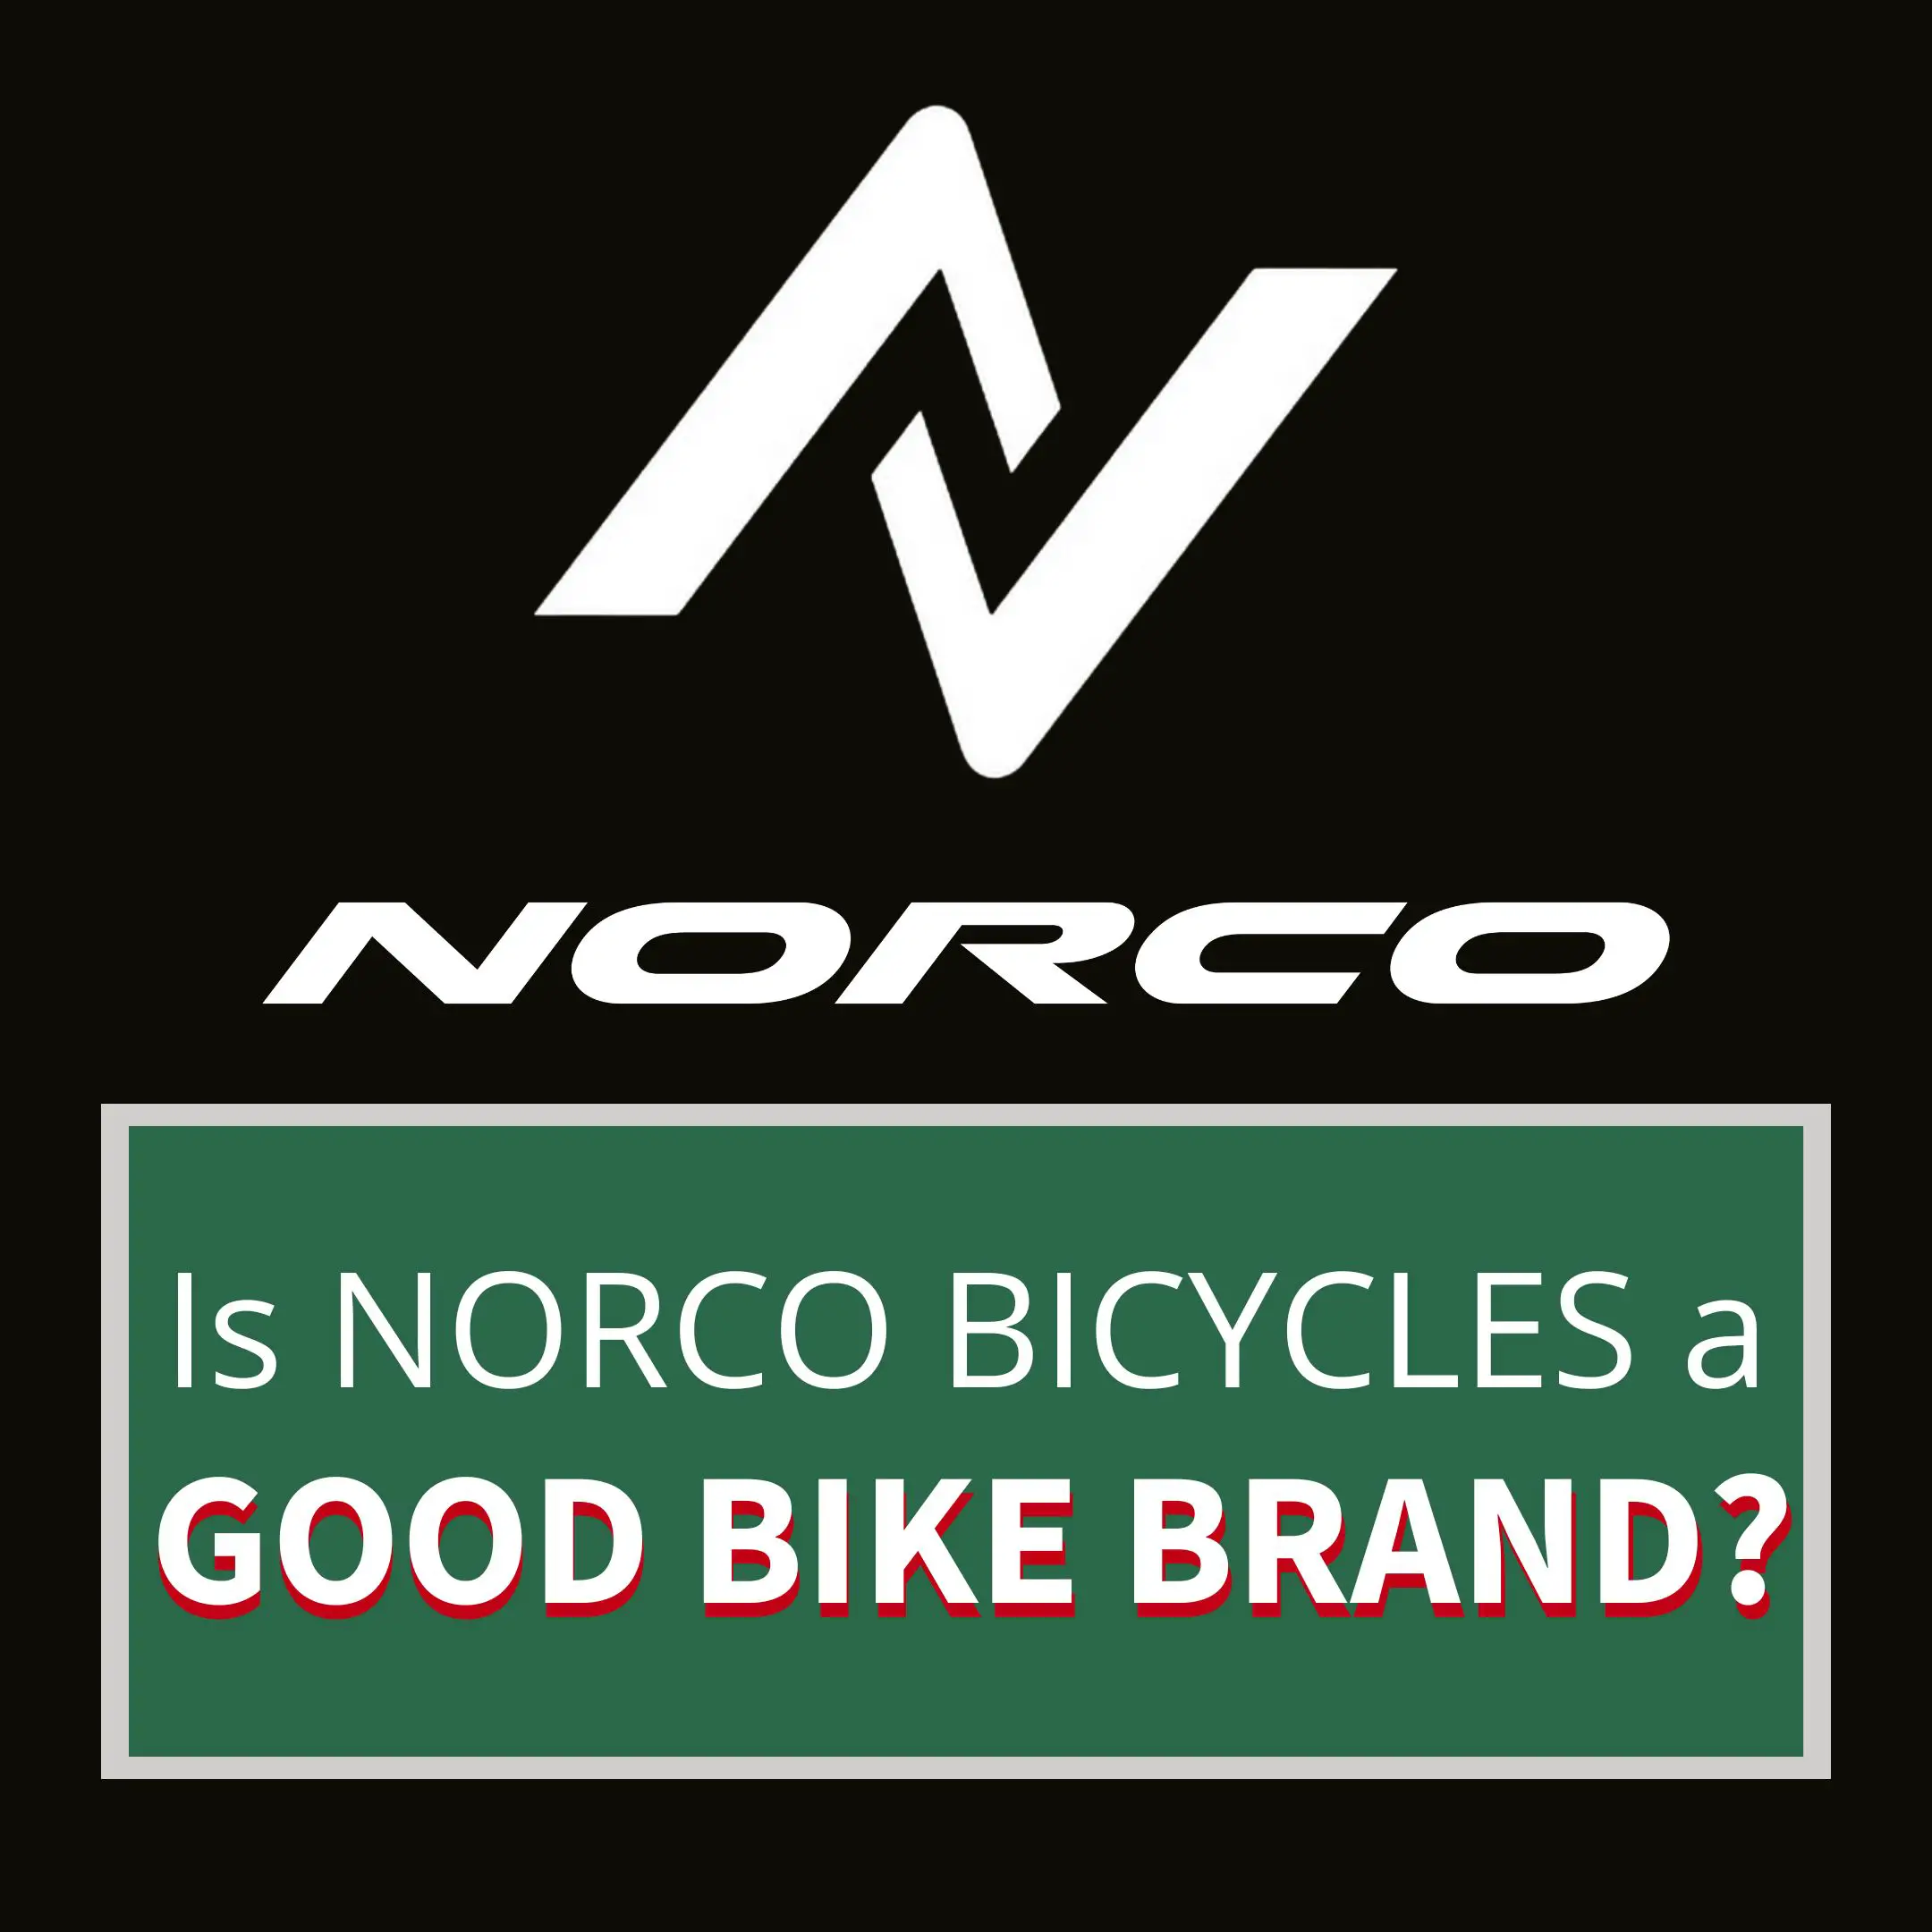 Norco bicycles white logo on a black background